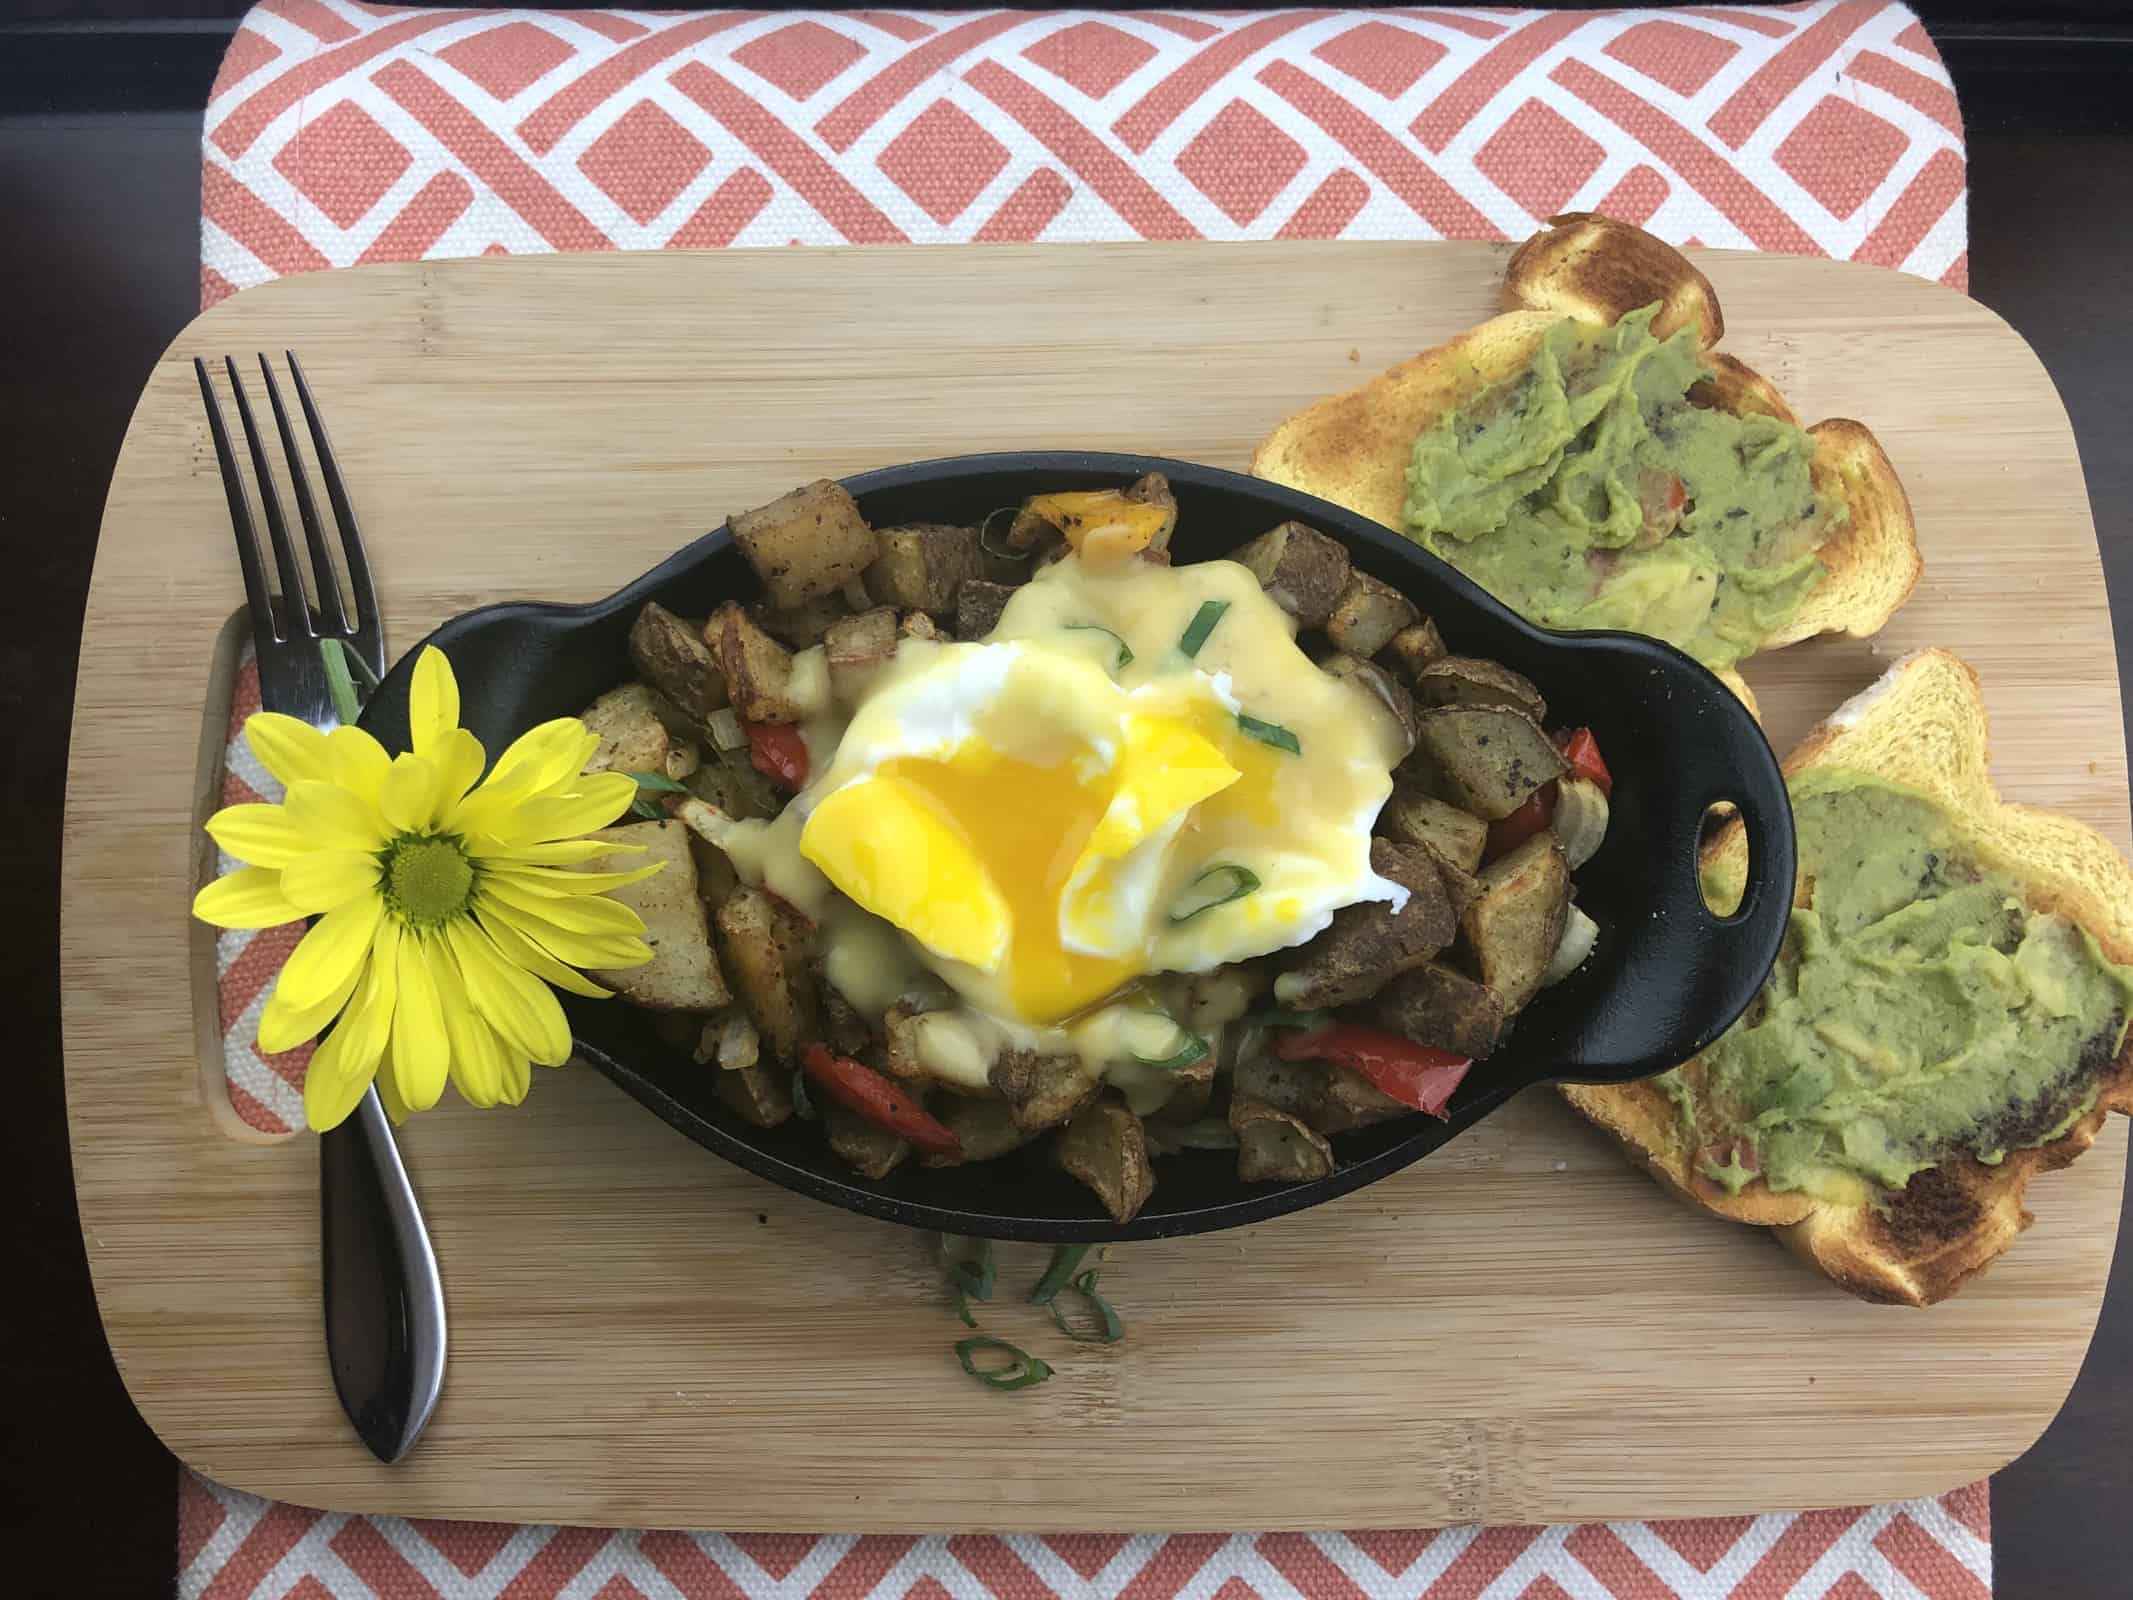 Air Fried Home Fries with a poached egg on top in a black casserole dish with a fork and avocado toast on a wooden cutting board